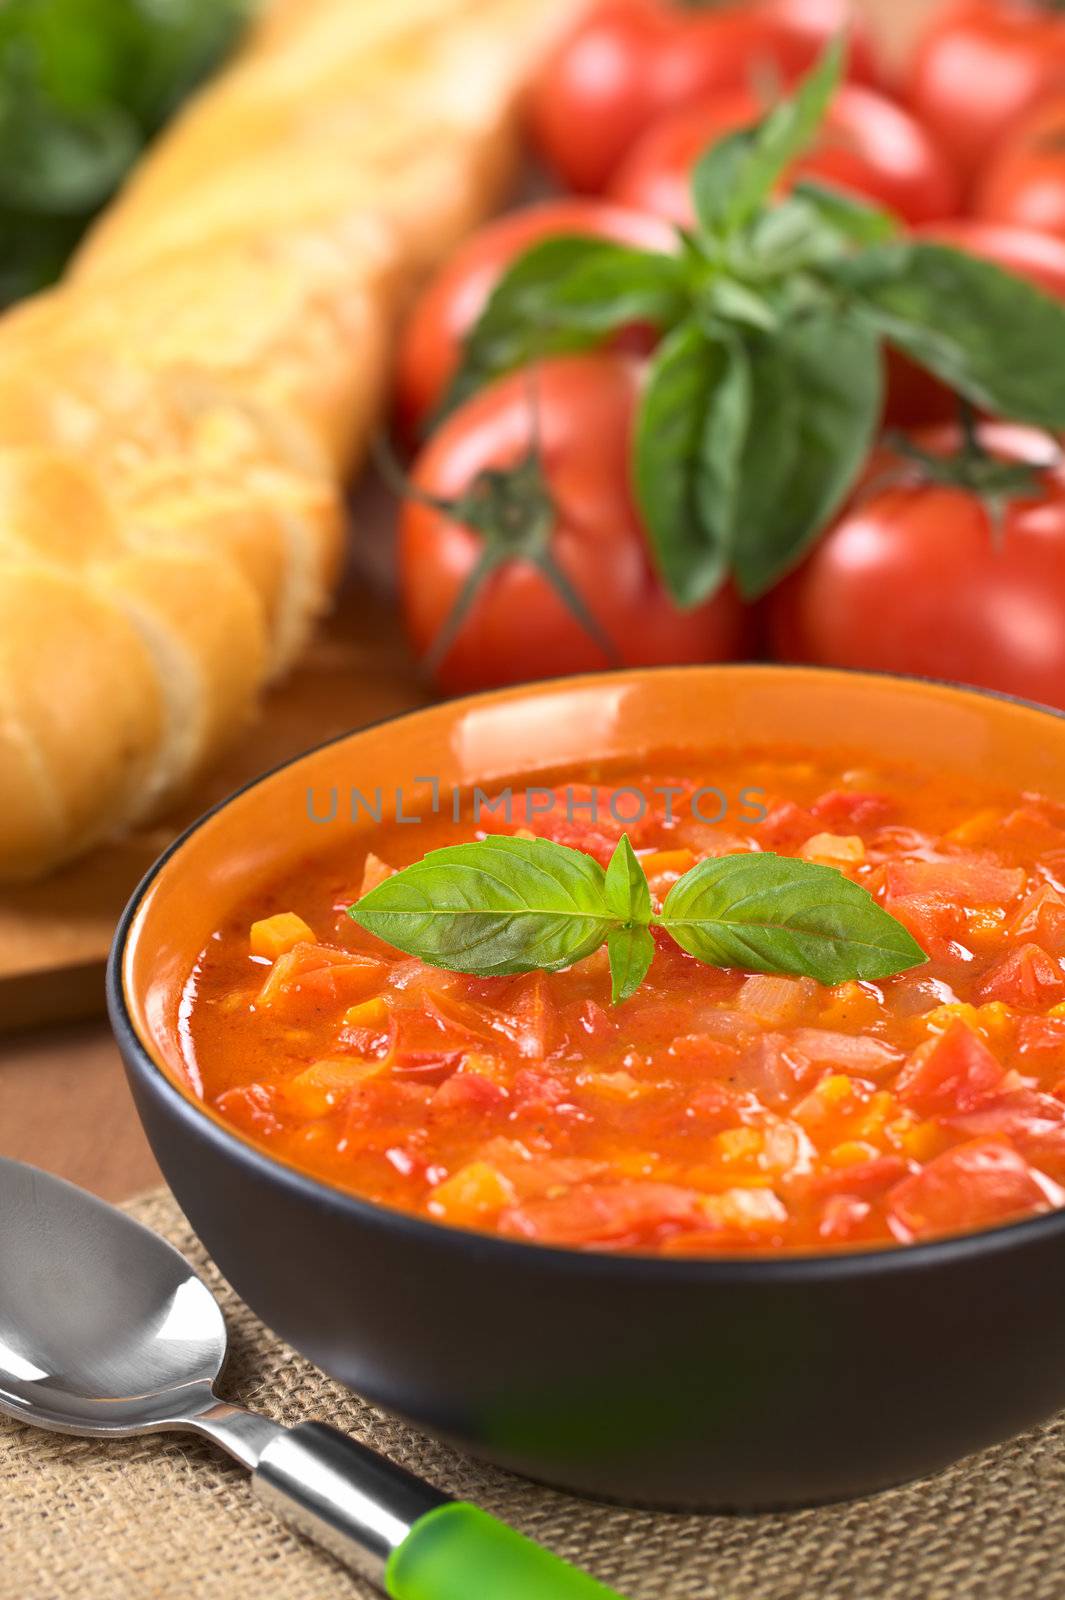 Chunky tomato soup made of tomatoes, carrots and onions and garnished with a basil leaf (Selective Focus, Focus on the basil leaf on the soup)